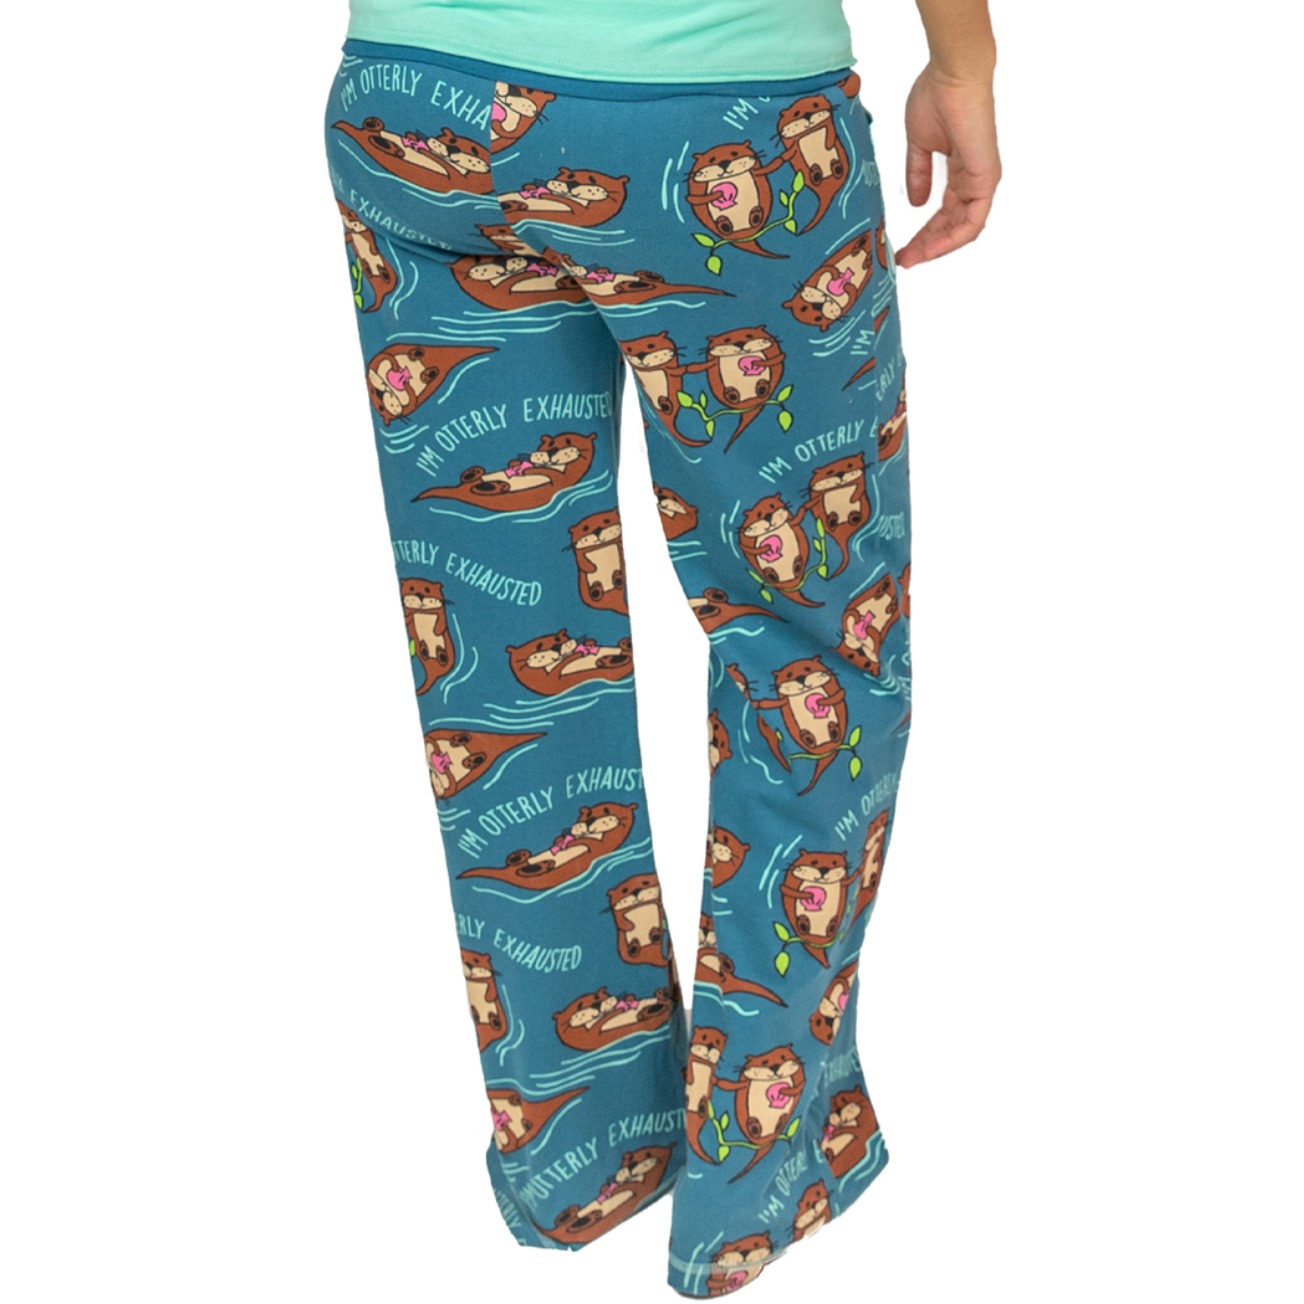 Otterly Exhausted Women's Pajama Pant